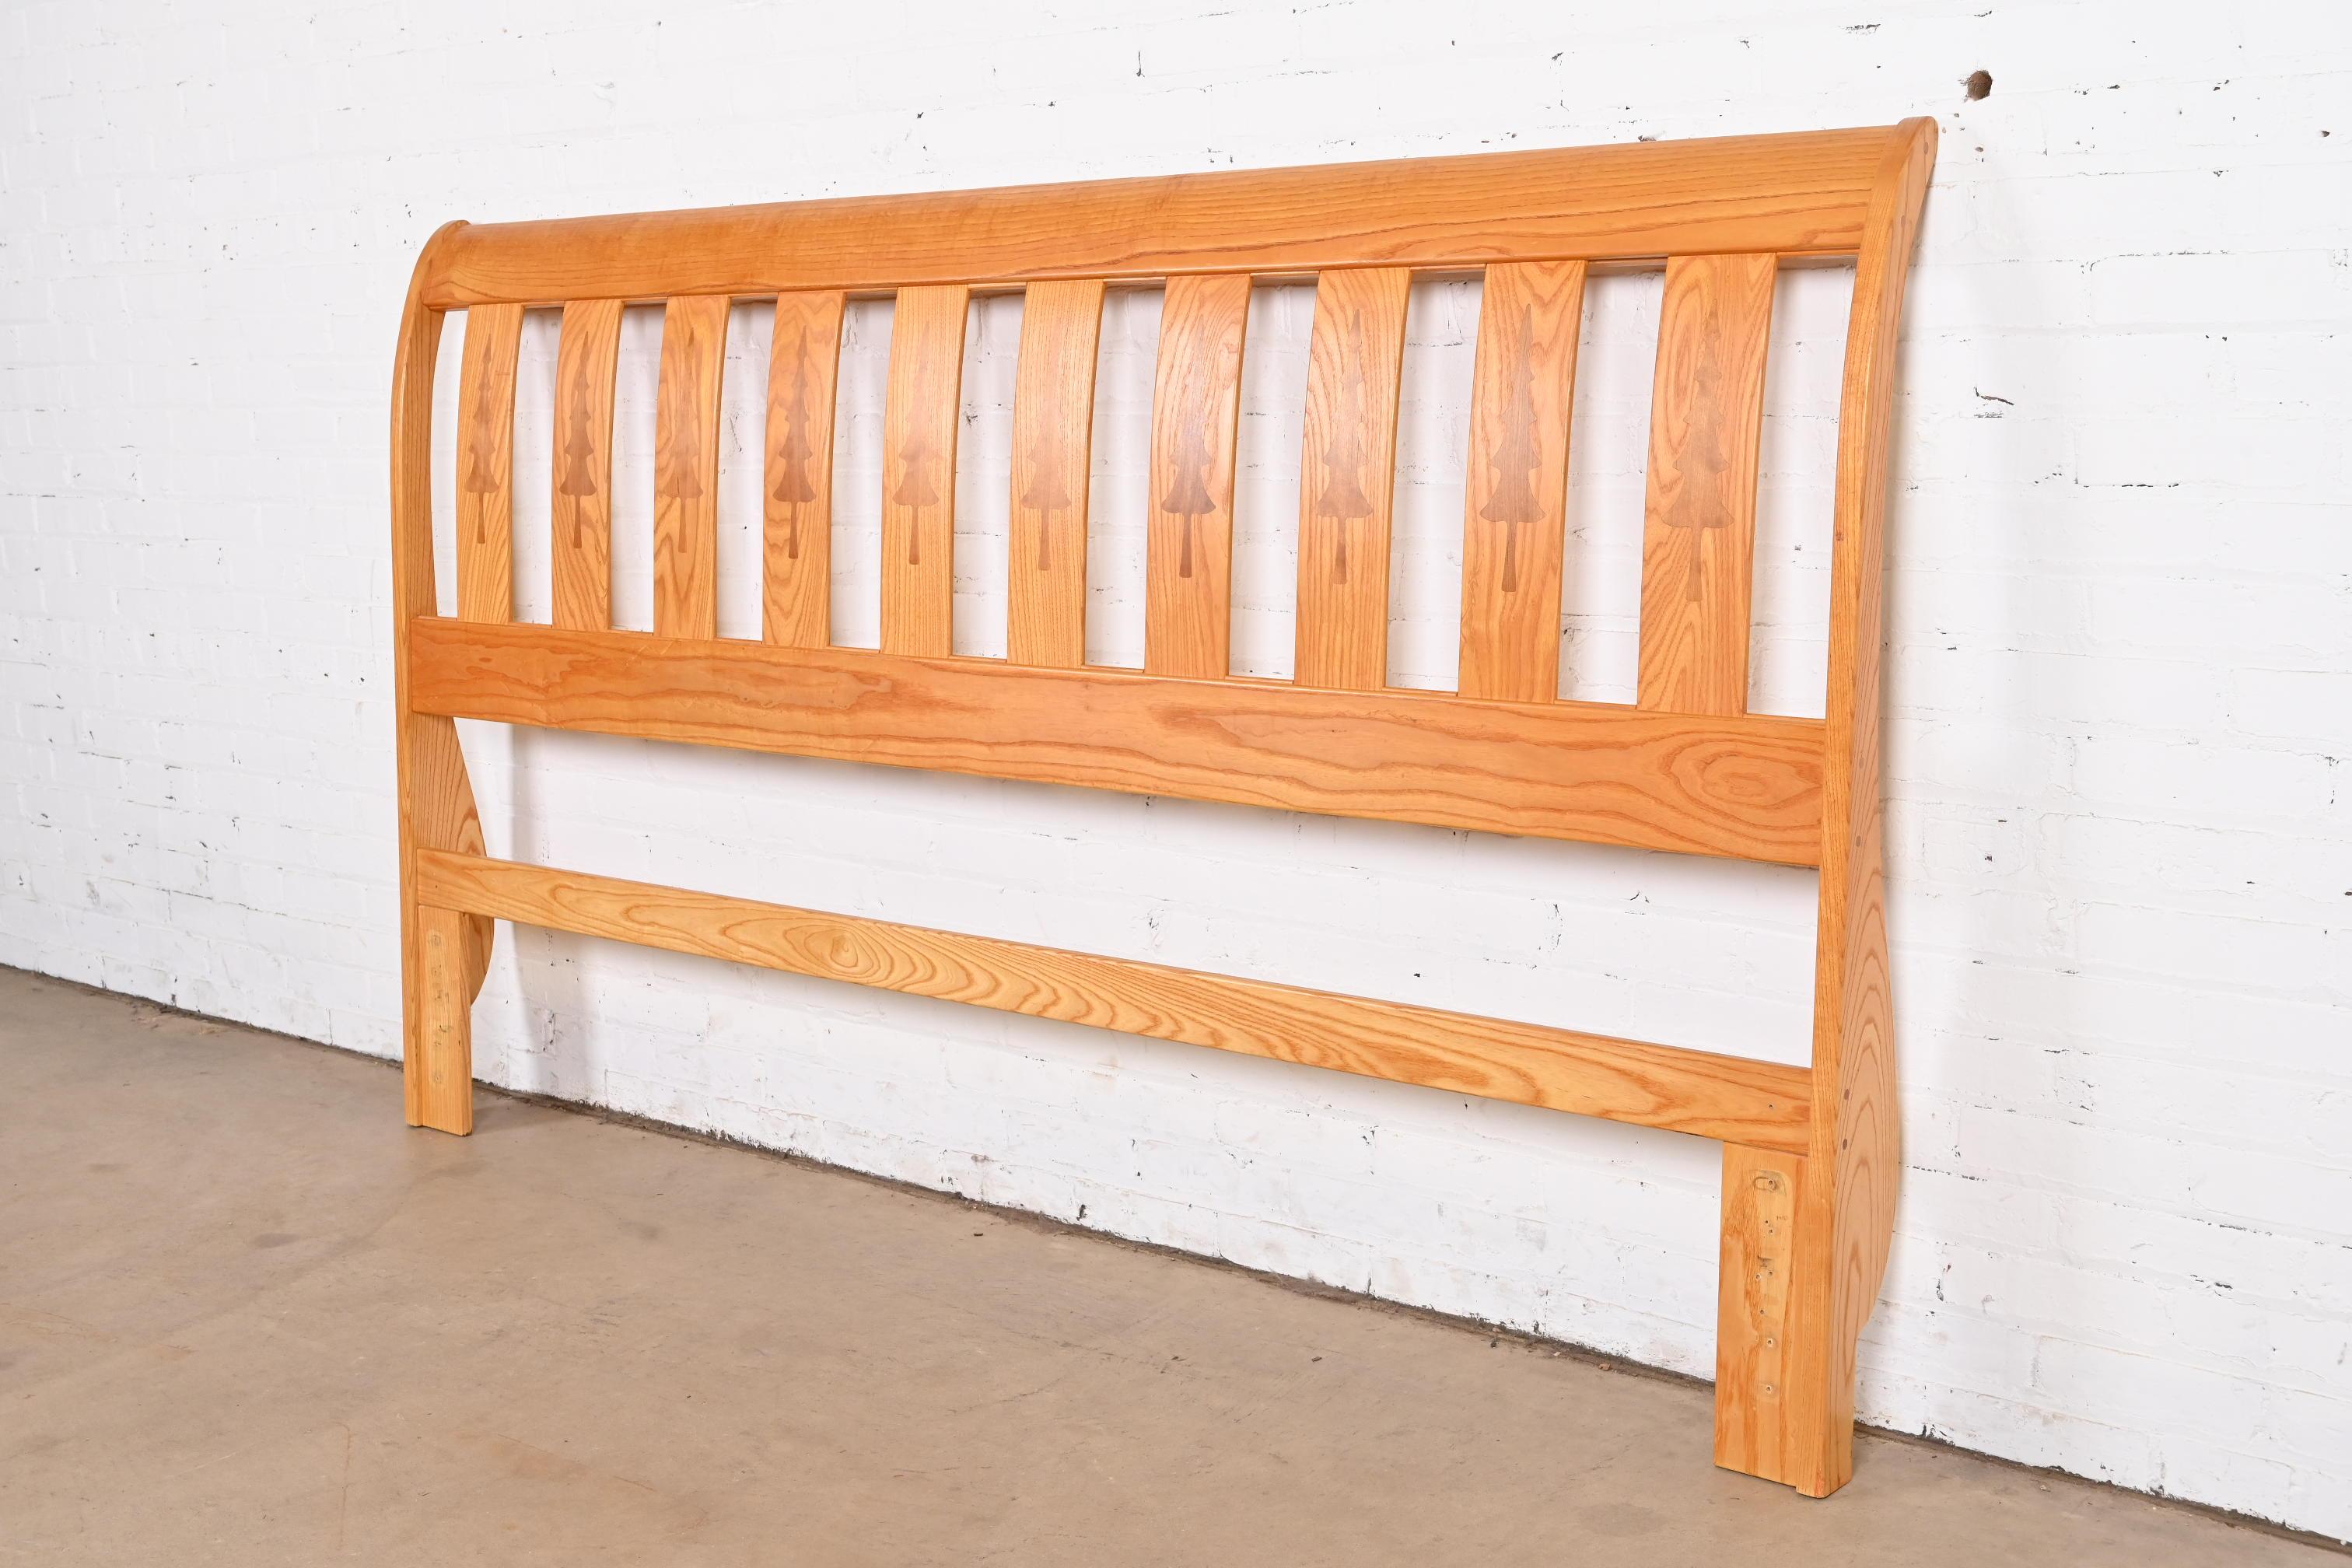 Studio Crafted Rustic Lodge Inlaid Pine King Size Headboard In Good Condition For Sale In South Bend, IN